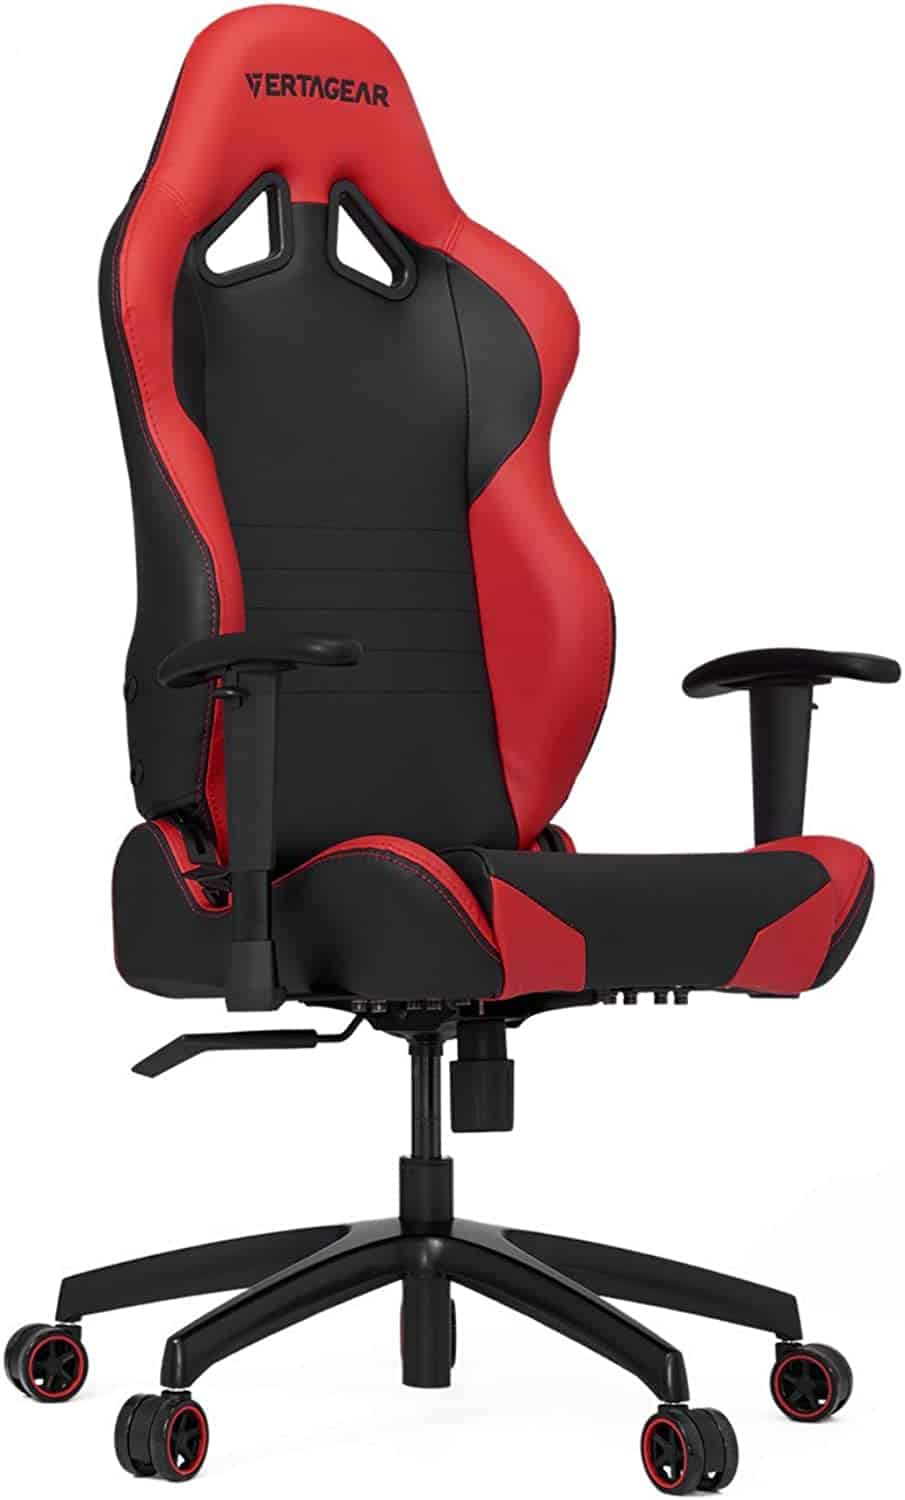 Vertagear S-Line SL2000 Ergonomic Office Chair Red and Black